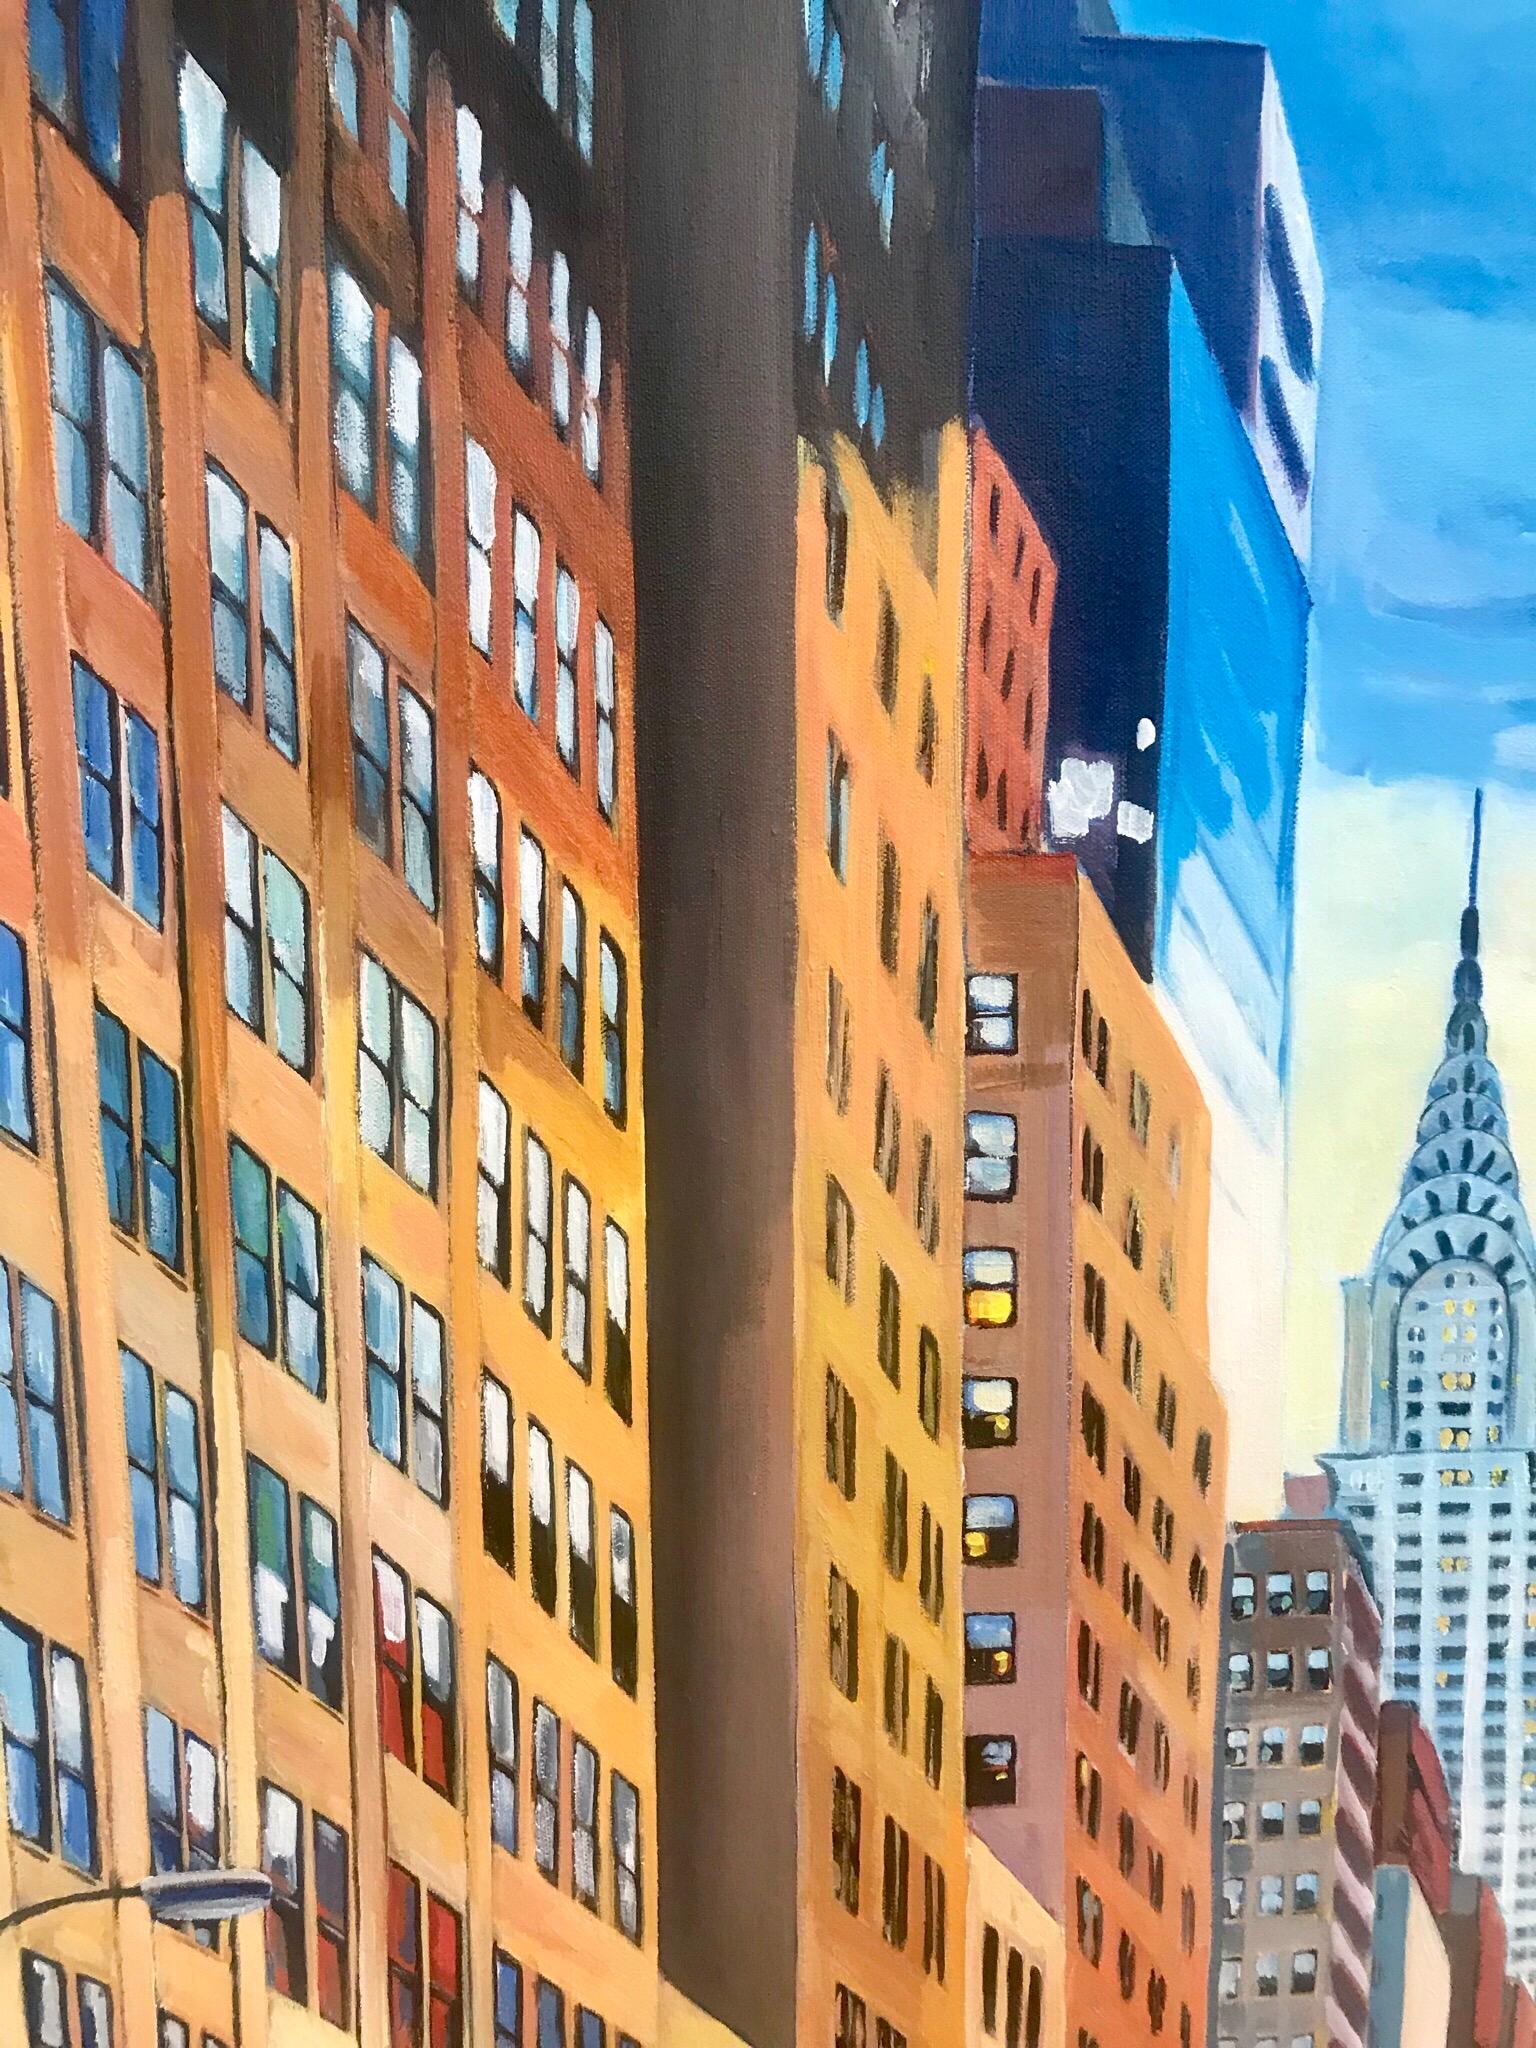 This painting captures the Chrysler Building on 42nd Street NYC against the backdrop of a beautiful sunset from street level.

Art measures 36 x 48 inches
Frame measures 41 x 55 inches

The artist, Angela Wakefield, is a leading British Urban